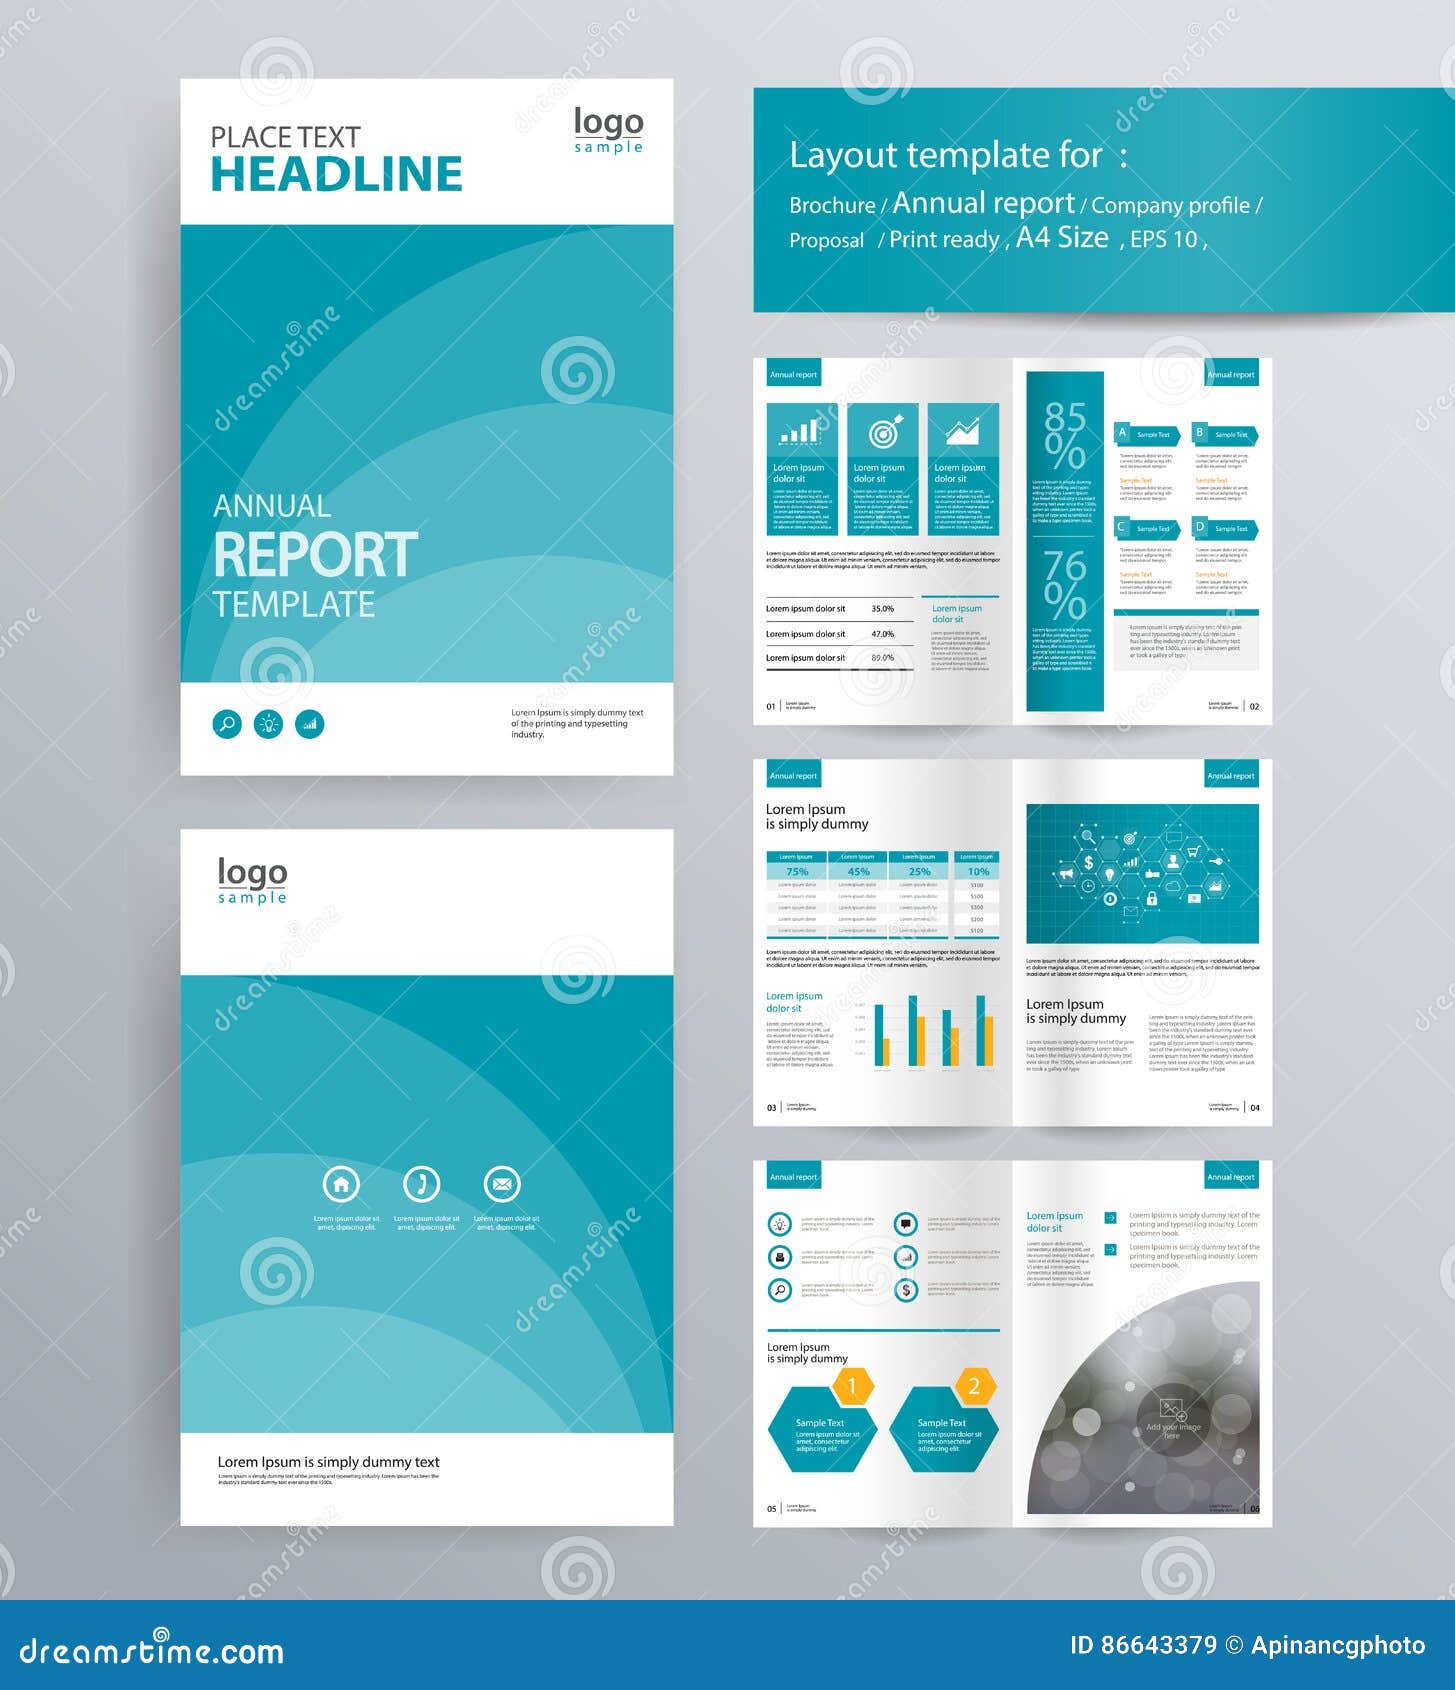 page layout for company profile, annual report, and brochure template.